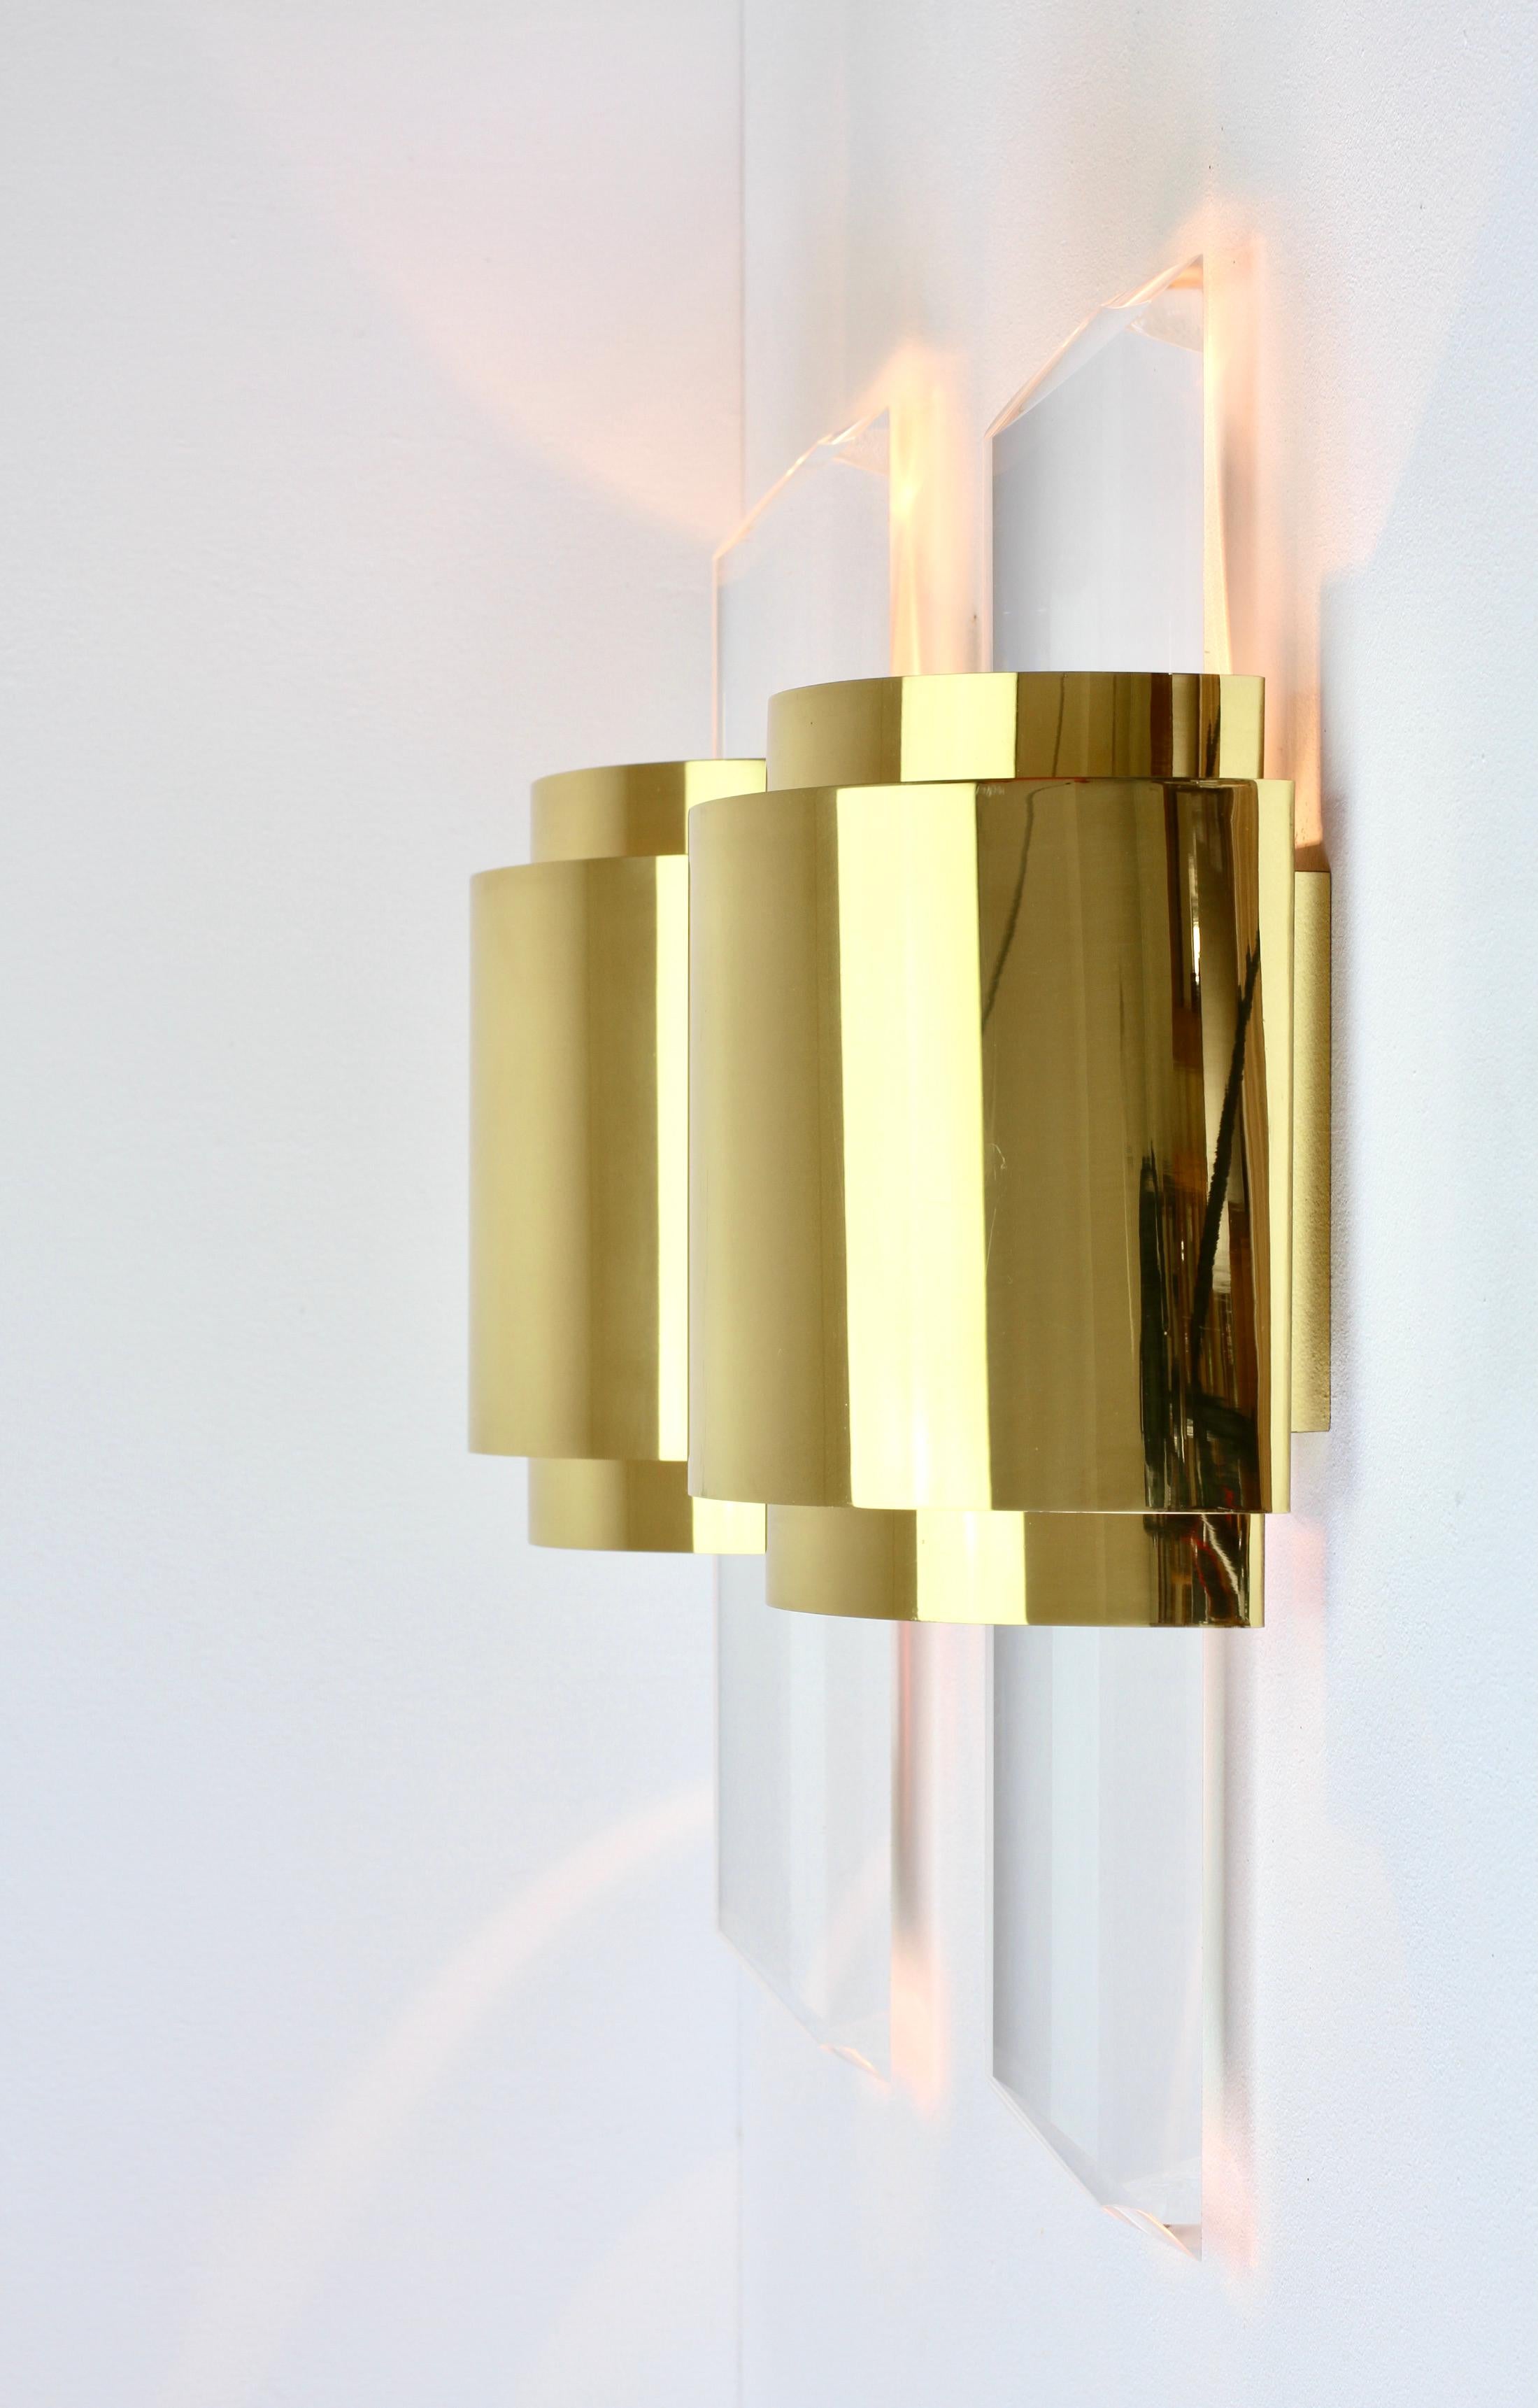 Large Hollywood Regency Lucite and Brass Wall Lights or Sconces, circa 1970s For Sale 2